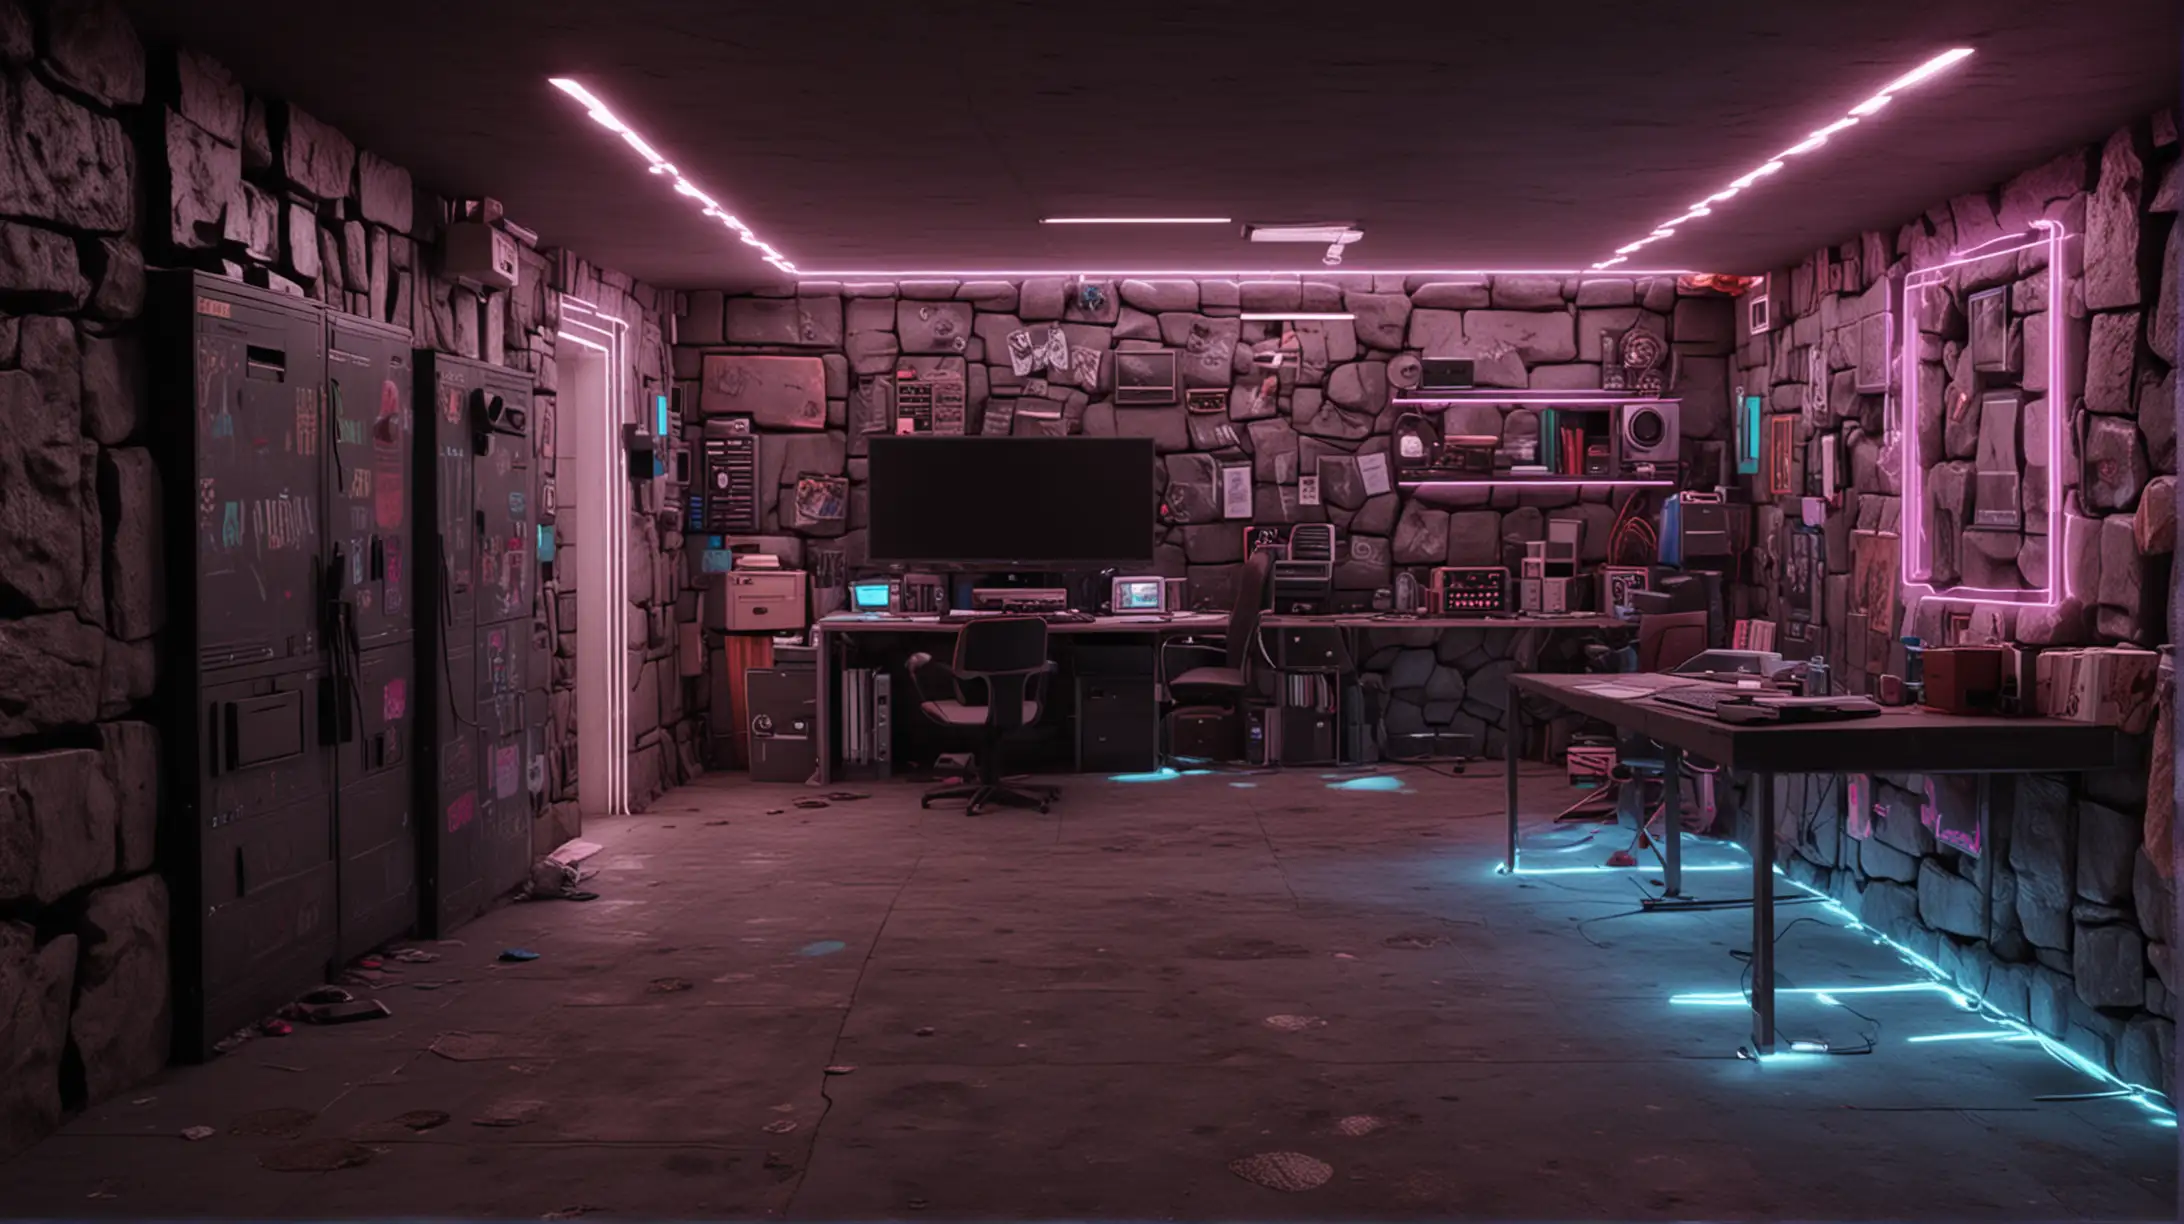 HyperRealistic Cyberpunk Personal Room with Neon Lighting and Rock Walls